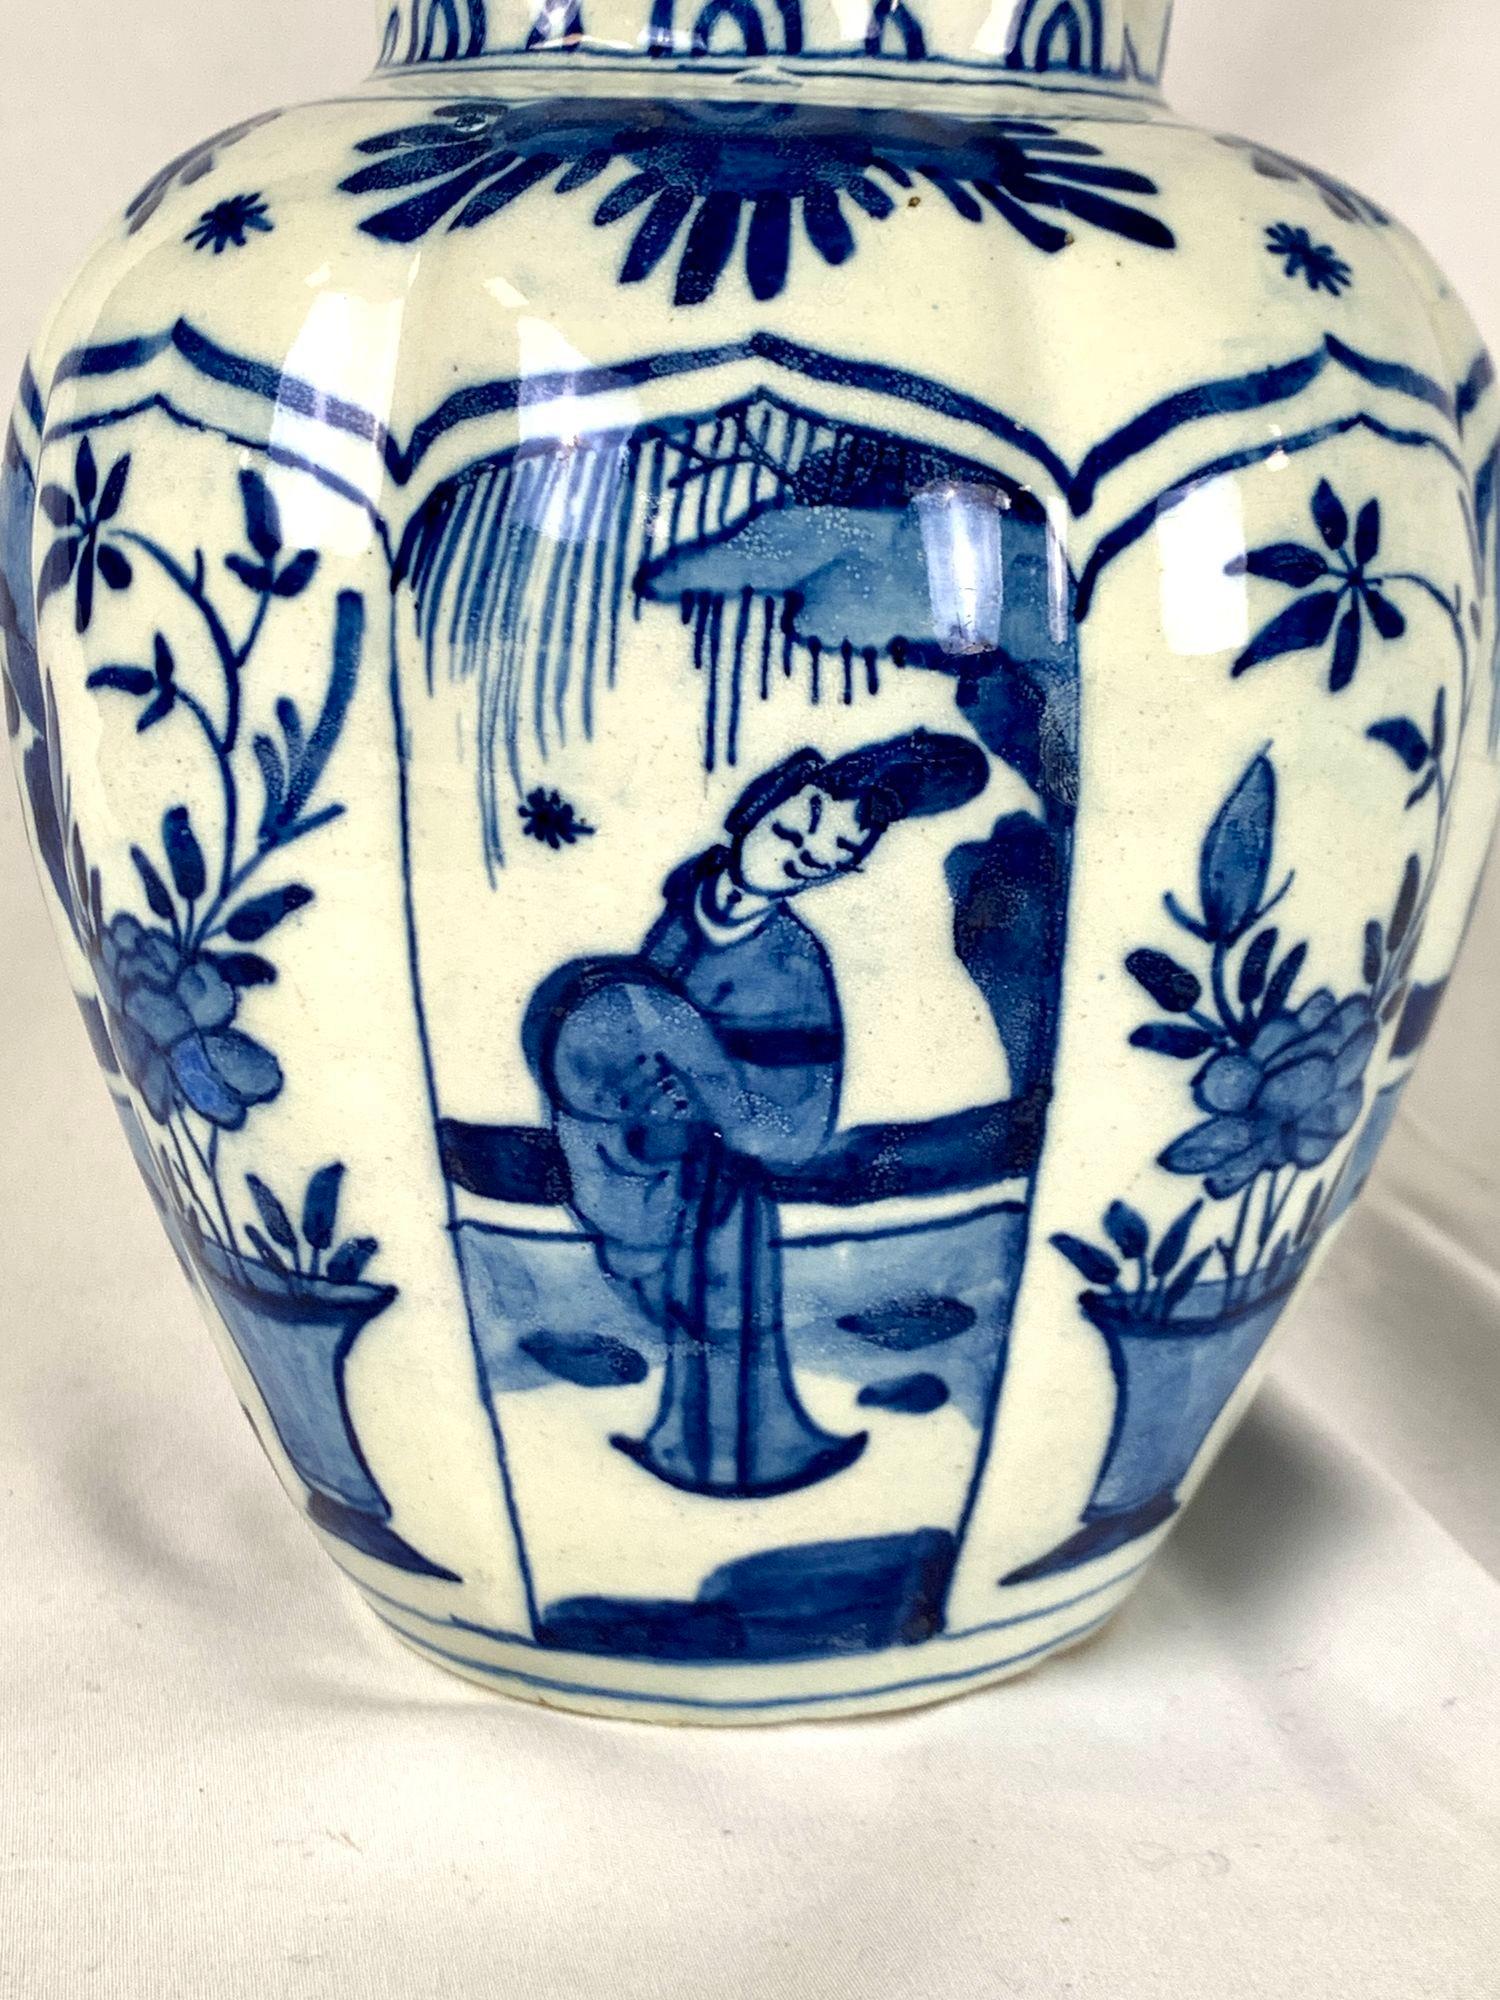 This beautiful jar was hand painted in the Netherlands around 1800.
It is decorated with a blue and white chinoiserie pattern that features alternating ogival panels with Oriental figures and vases containing peonies.
The jar is lobed in an